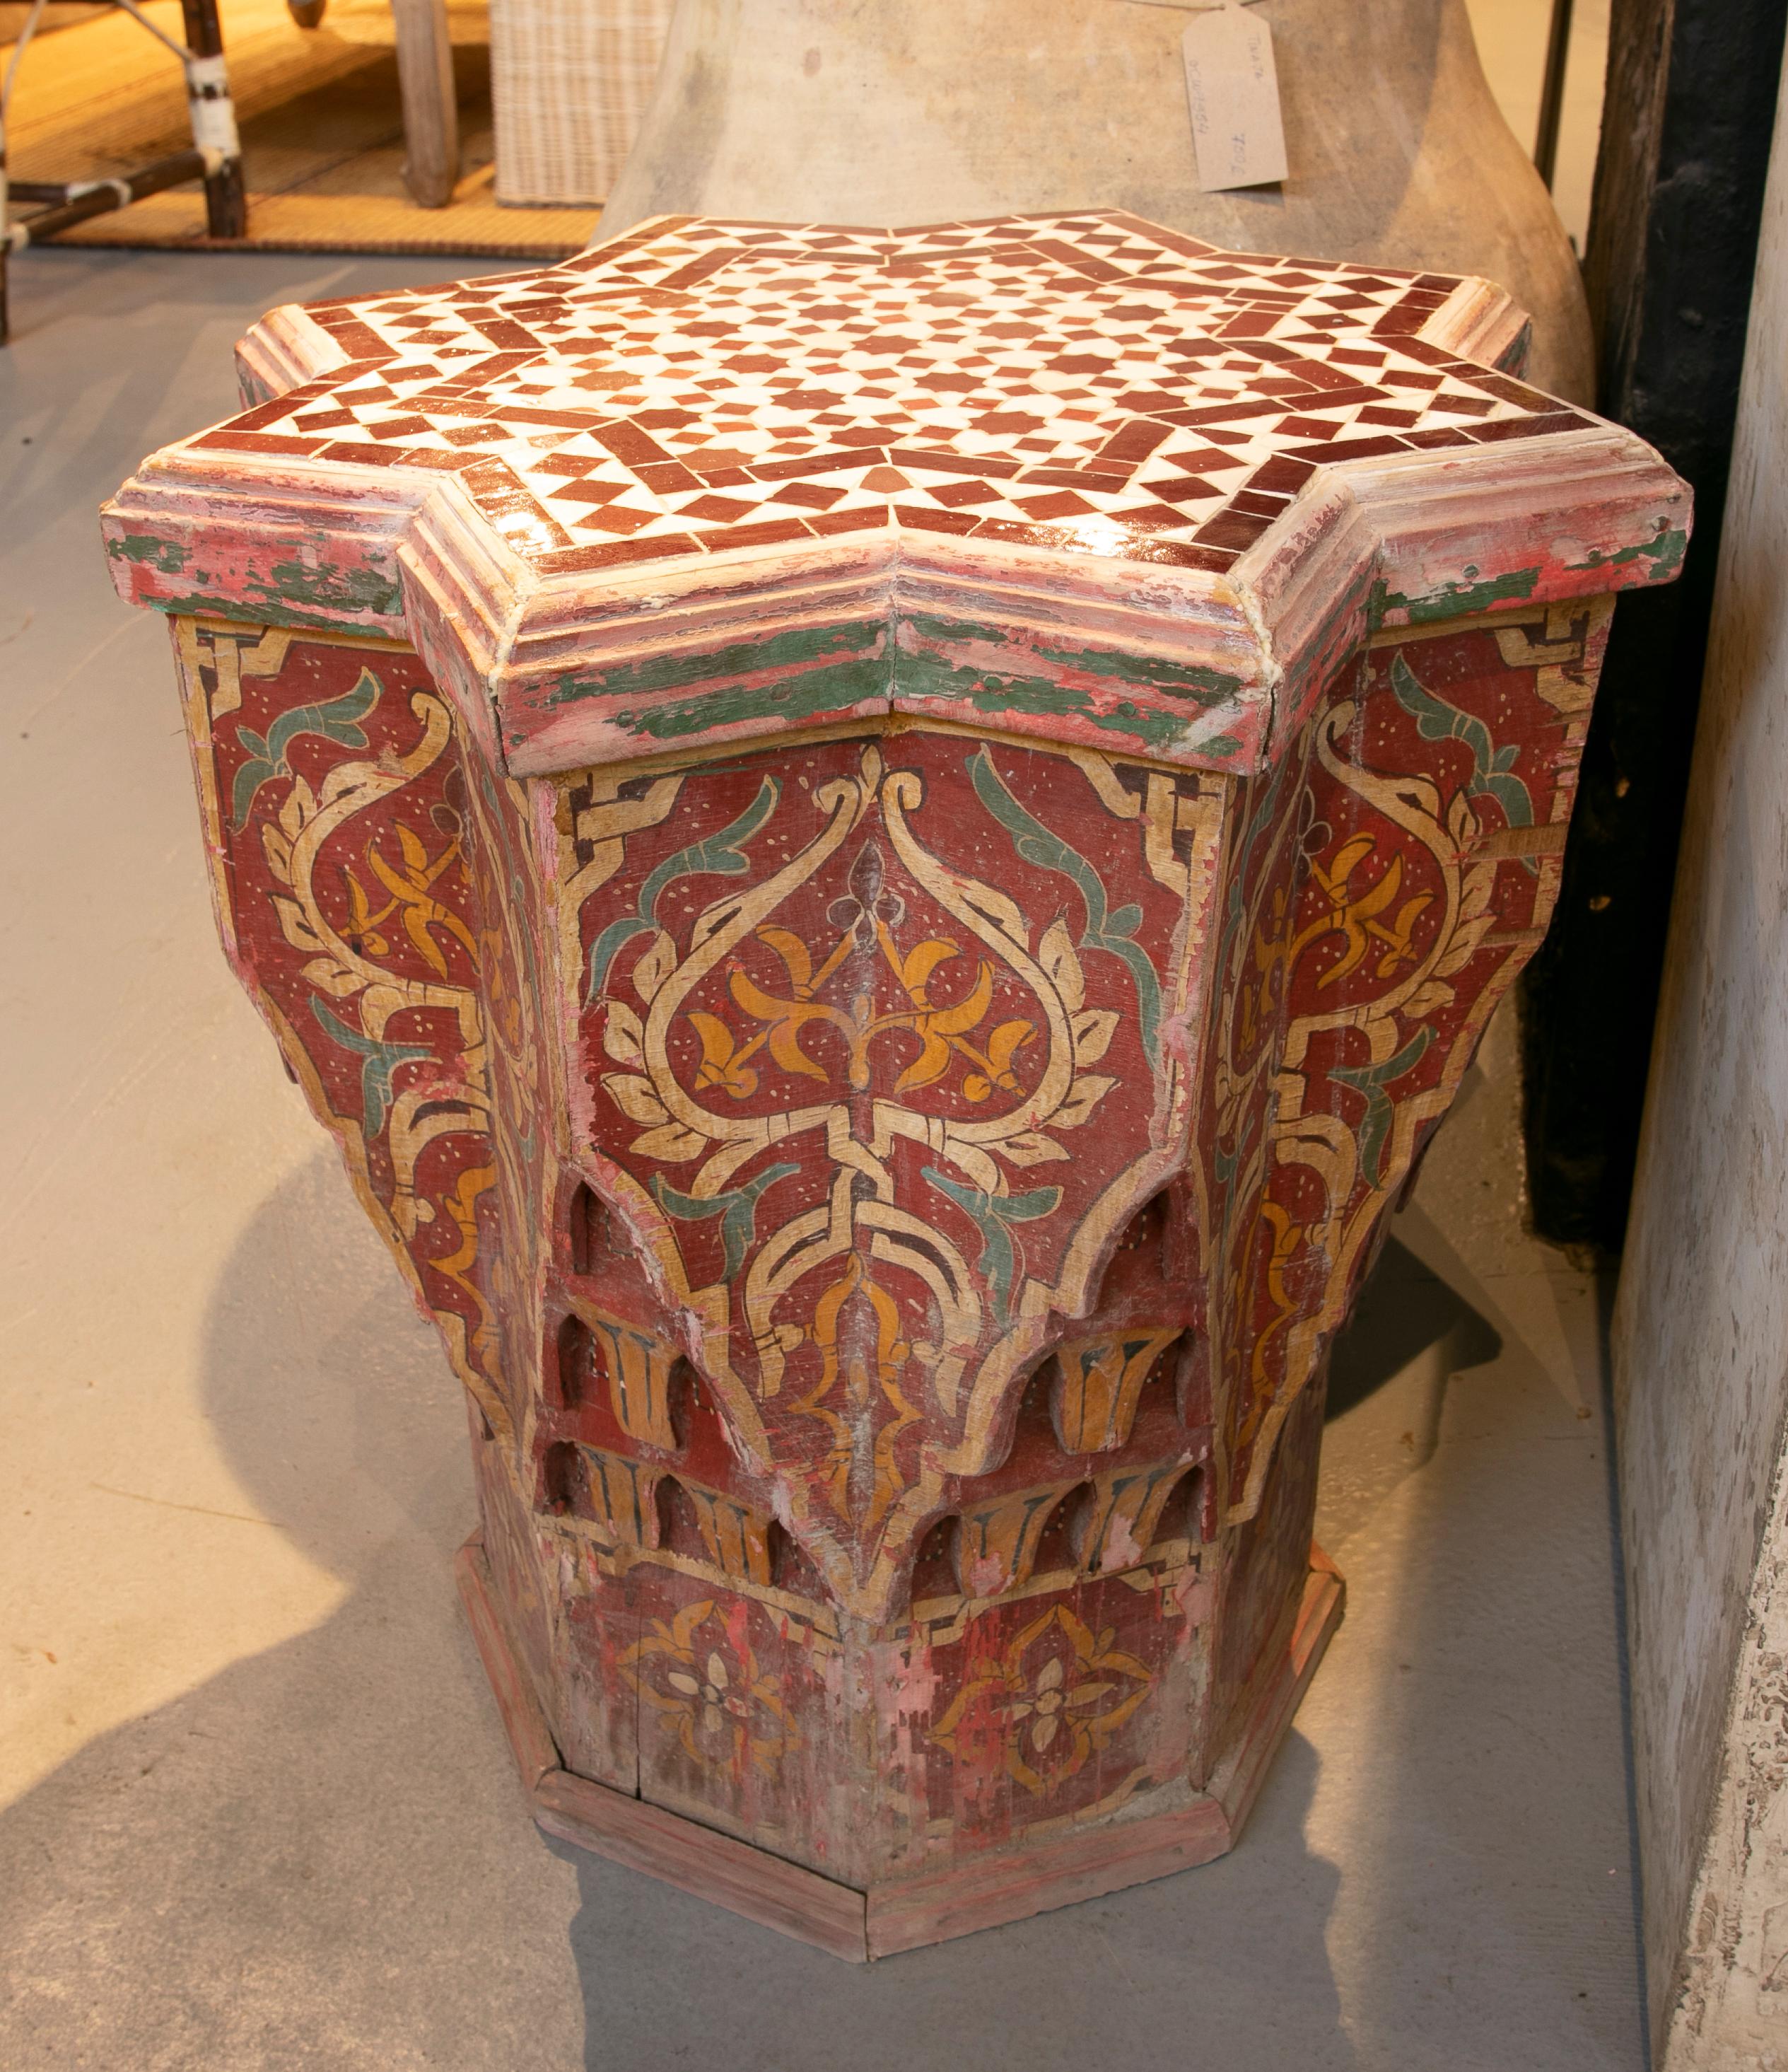 Polychrome wooden side table with tiled top.